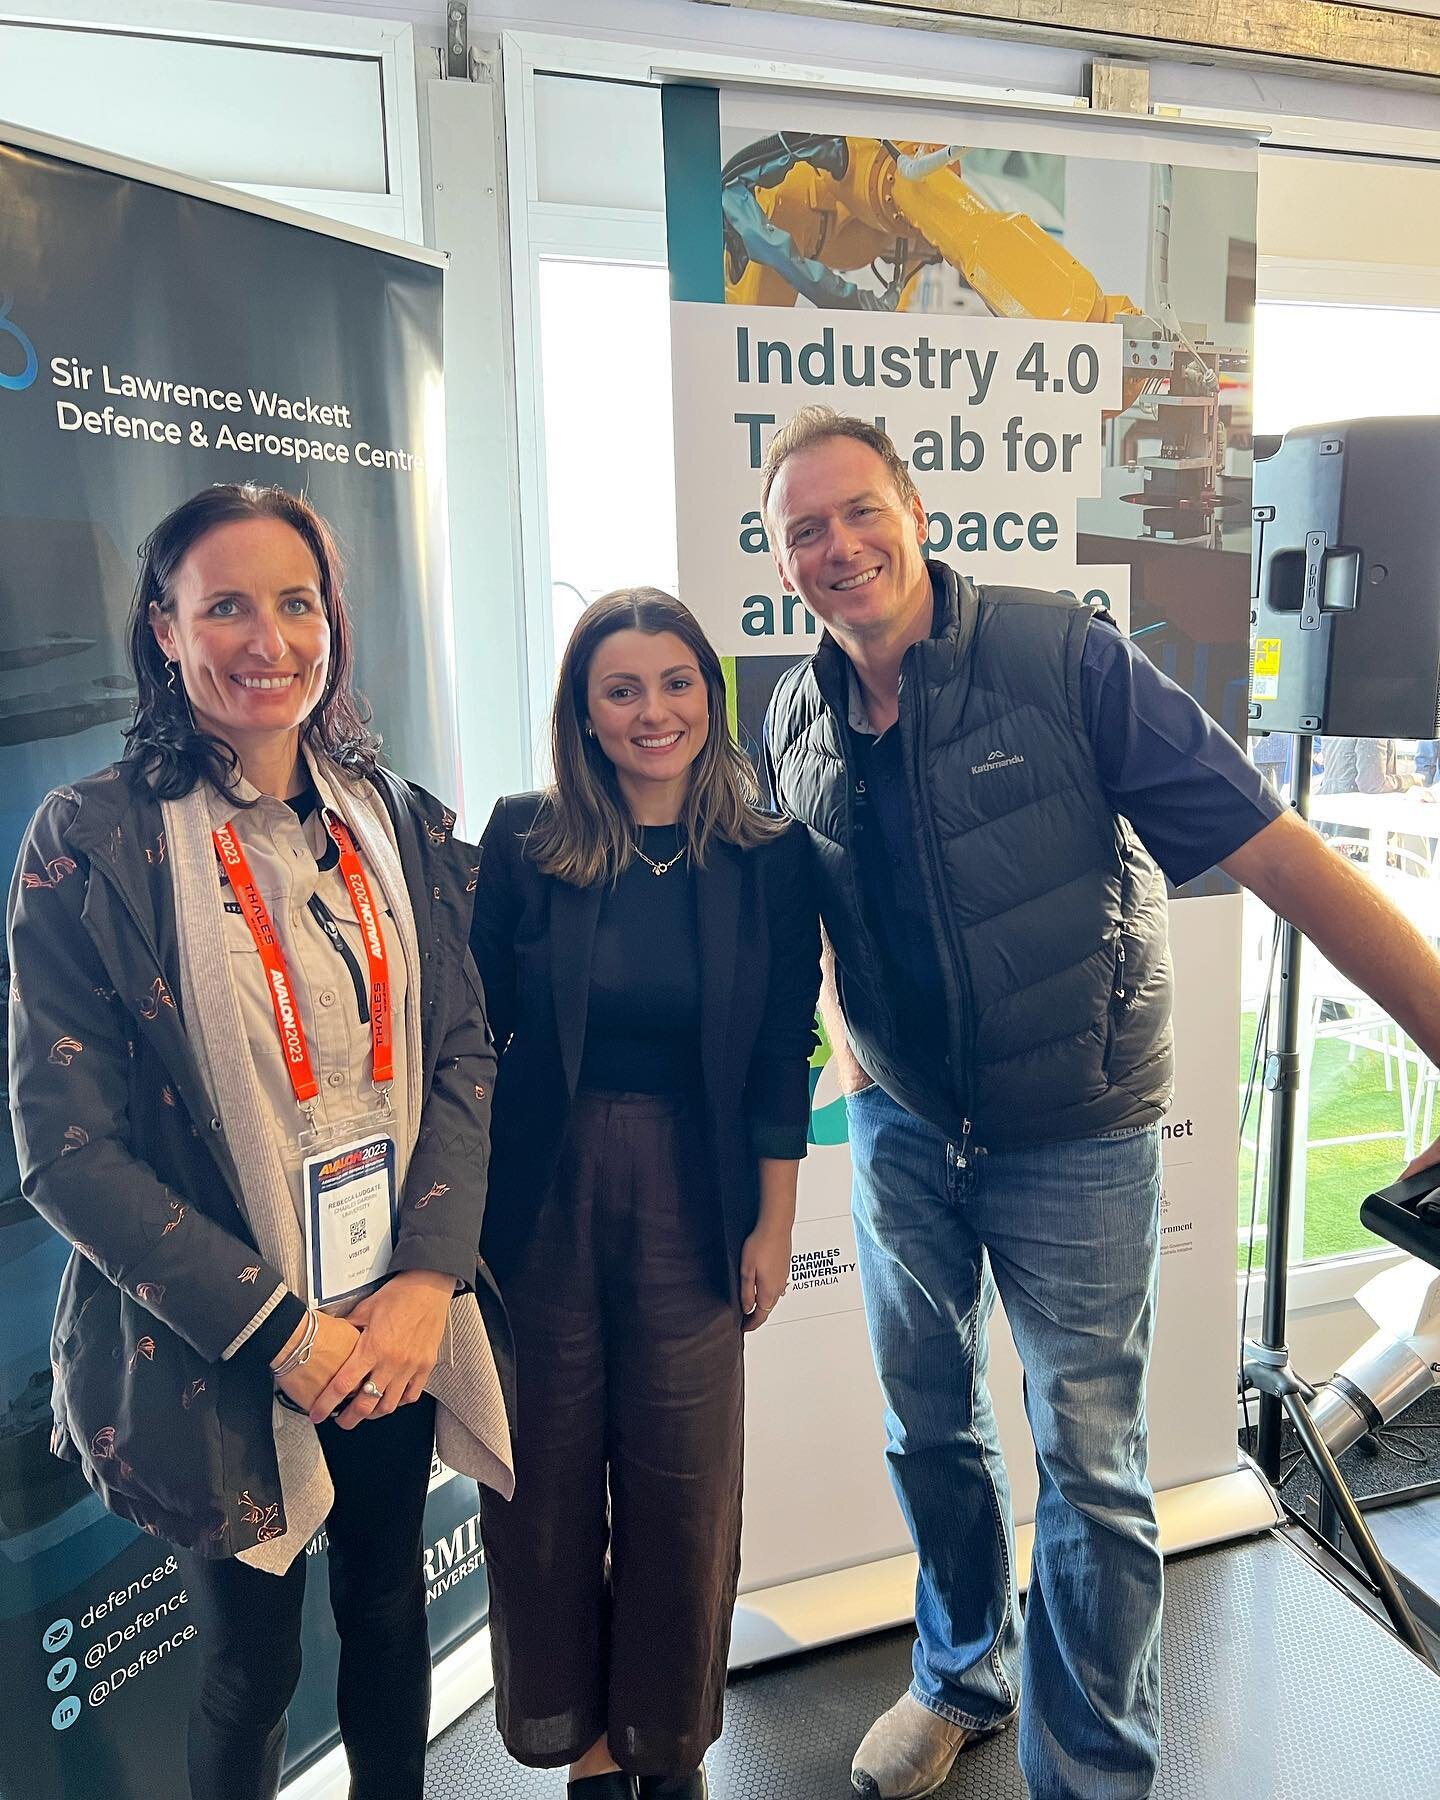 Some of the NACAS team attended the Australian International Airshow in Avalon this week. It was an invaluable few days to meet and hear from industry experts. 
The flying displays were pretty spectacular too! ✈️

@australianinternationalairshow